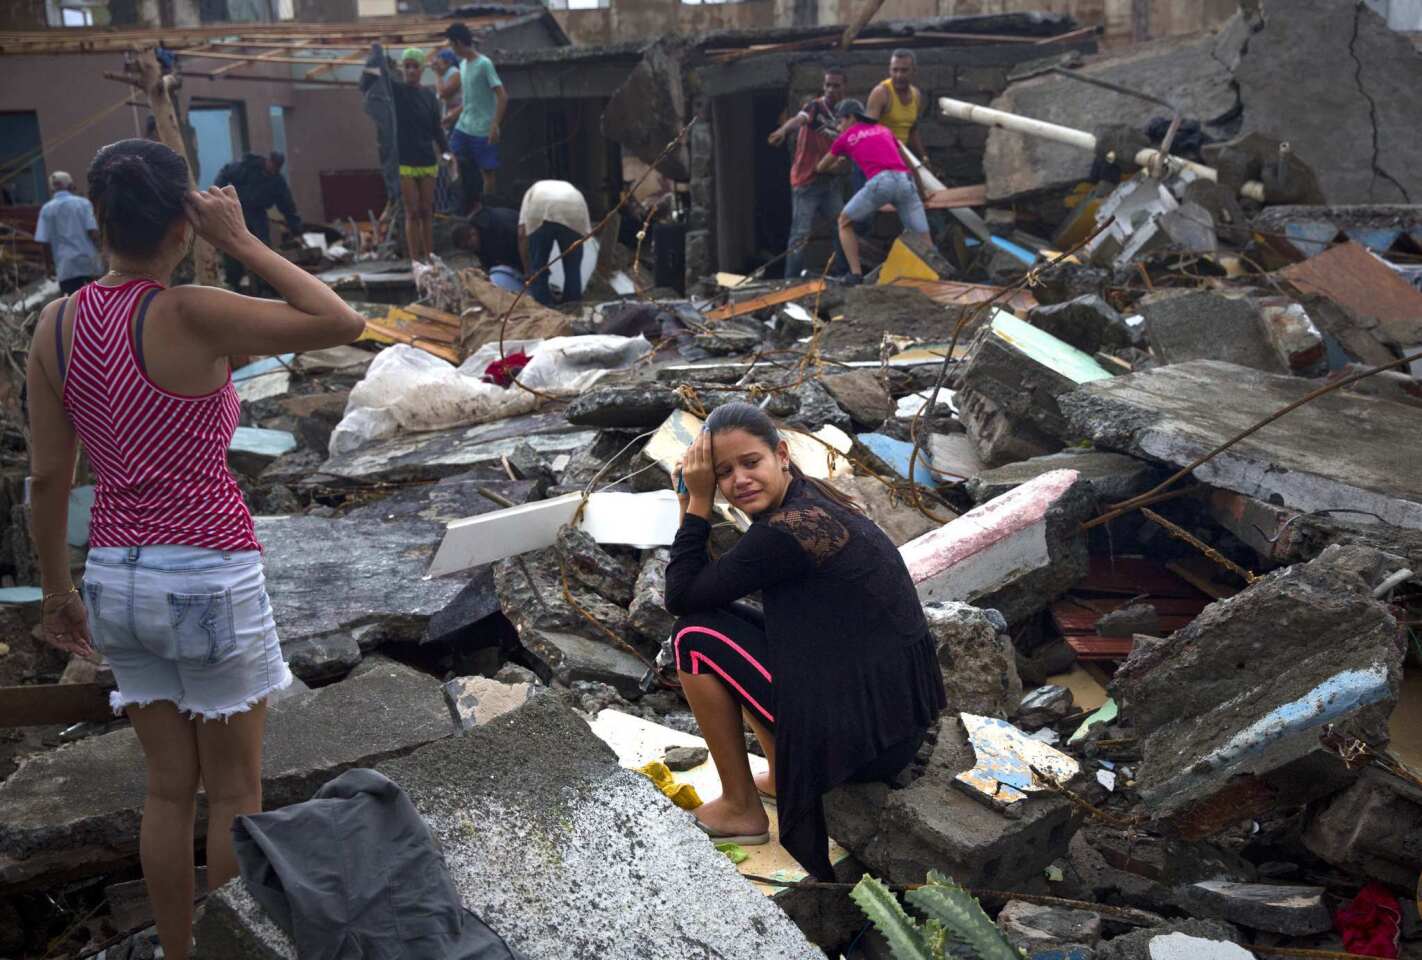 A woman cries amid the rubble of her home, destroyed by Hurricane Matthew in Baracoa, Cuba, Wednesday, Oct. 5, 2016.